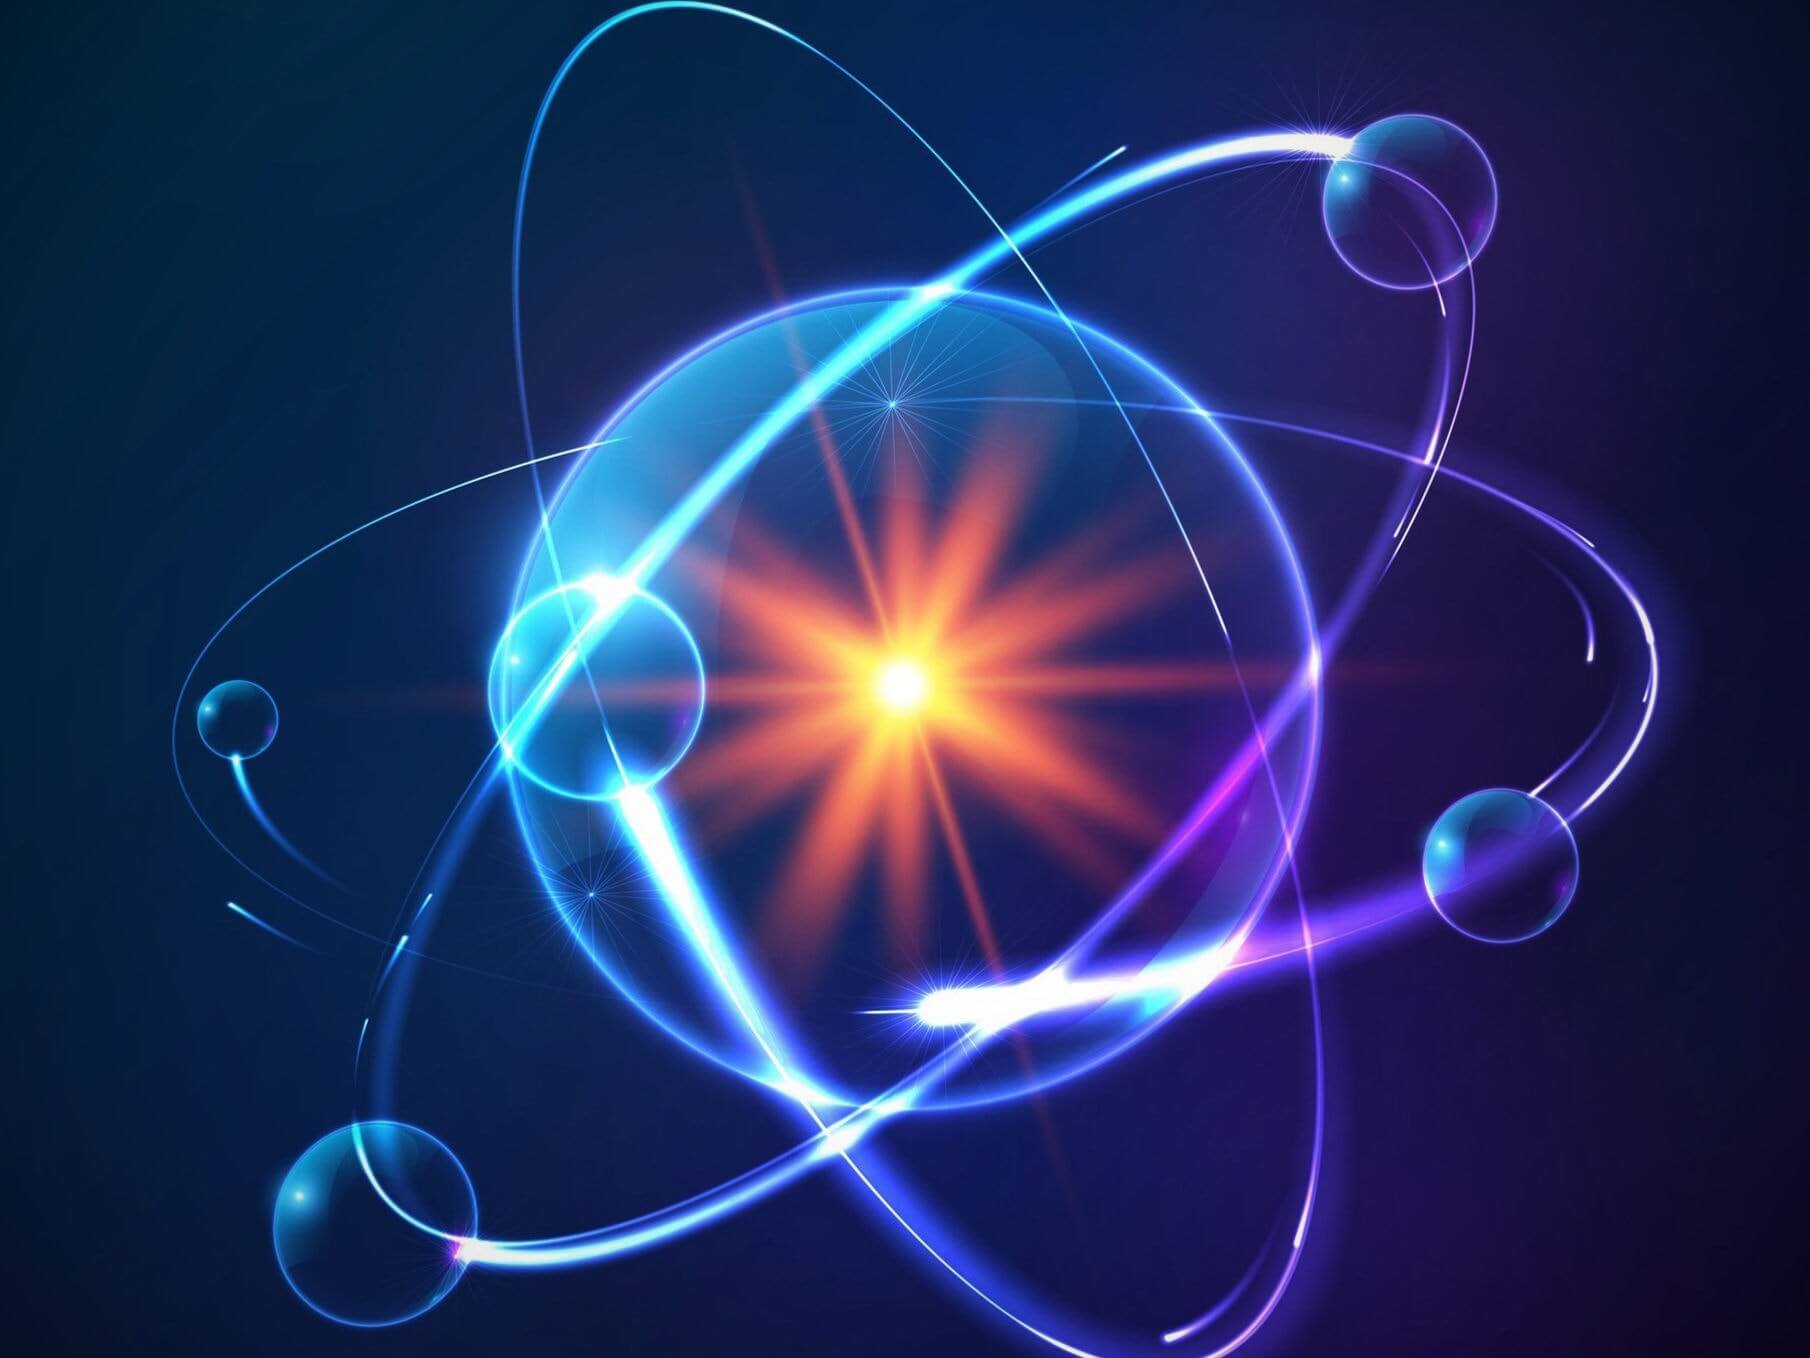 Physicists have found proof of the existence of another force of nature